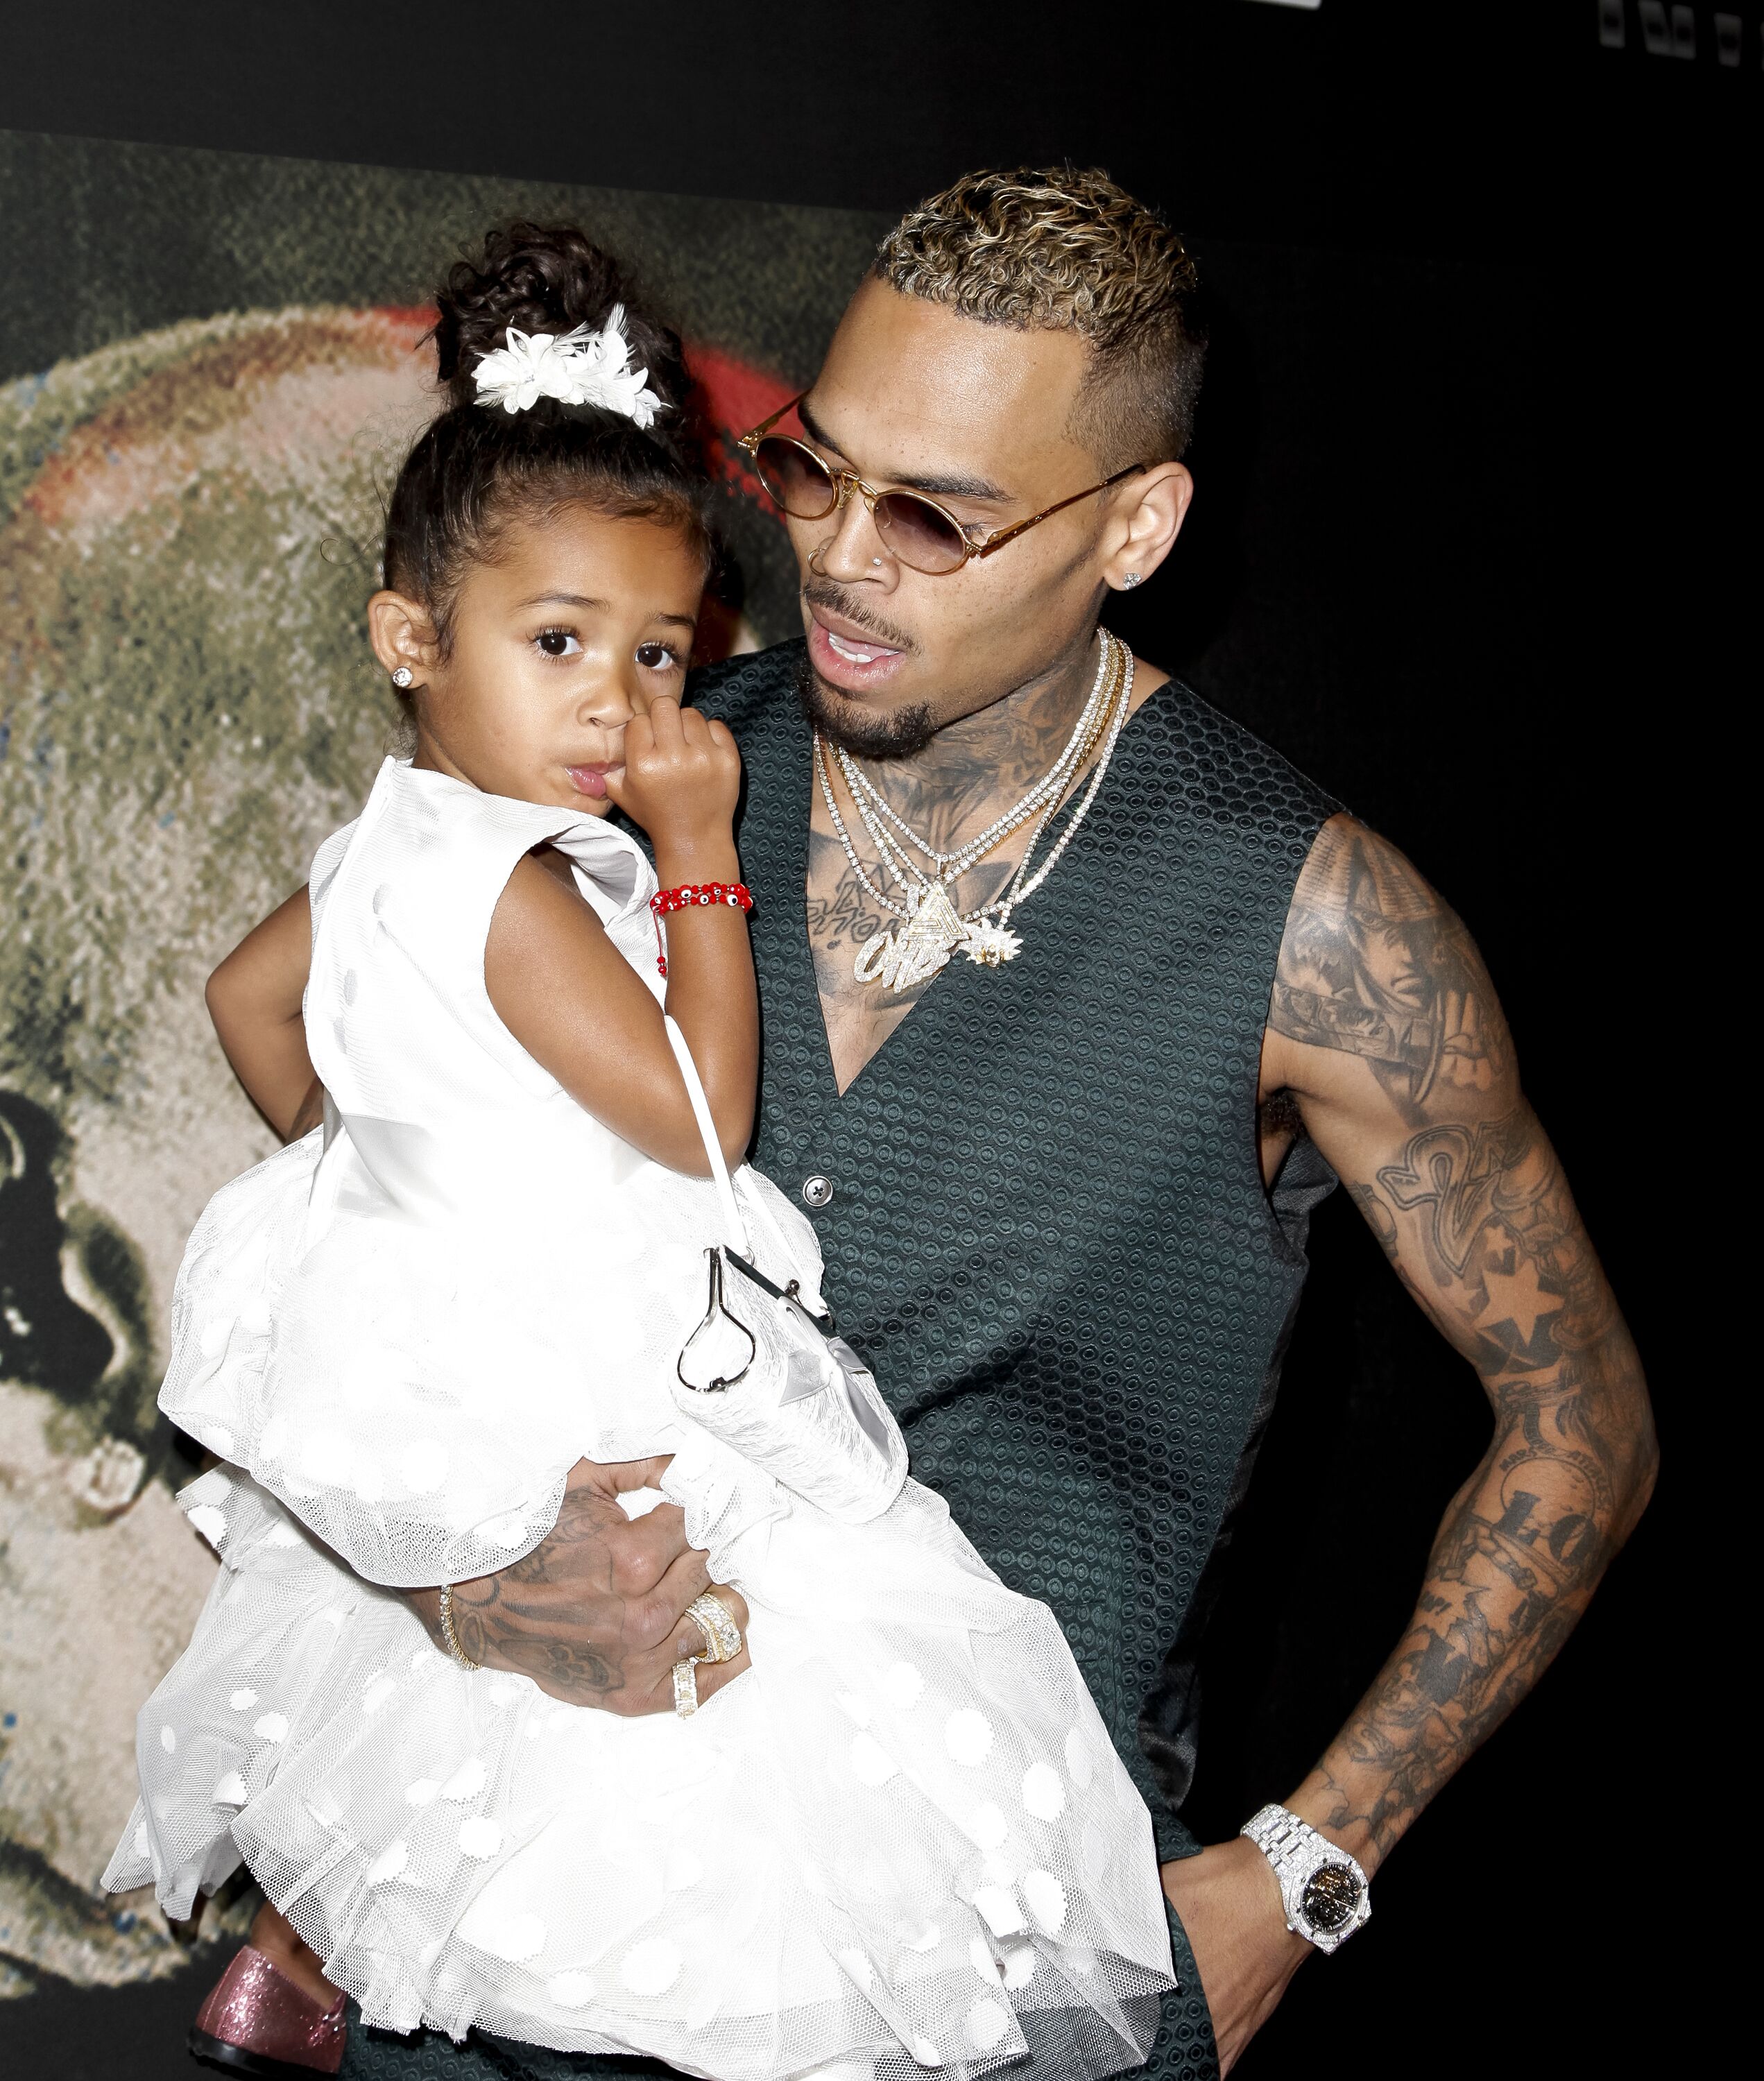 Chris Brown carries his daughter Royalty Brown in his arms as they arrive at the premiere for "Chris Brown: Welcome To My Life" on June 6, 2017, in Los Angeles, California | Source:  Jonathan Leibson/Getty Images